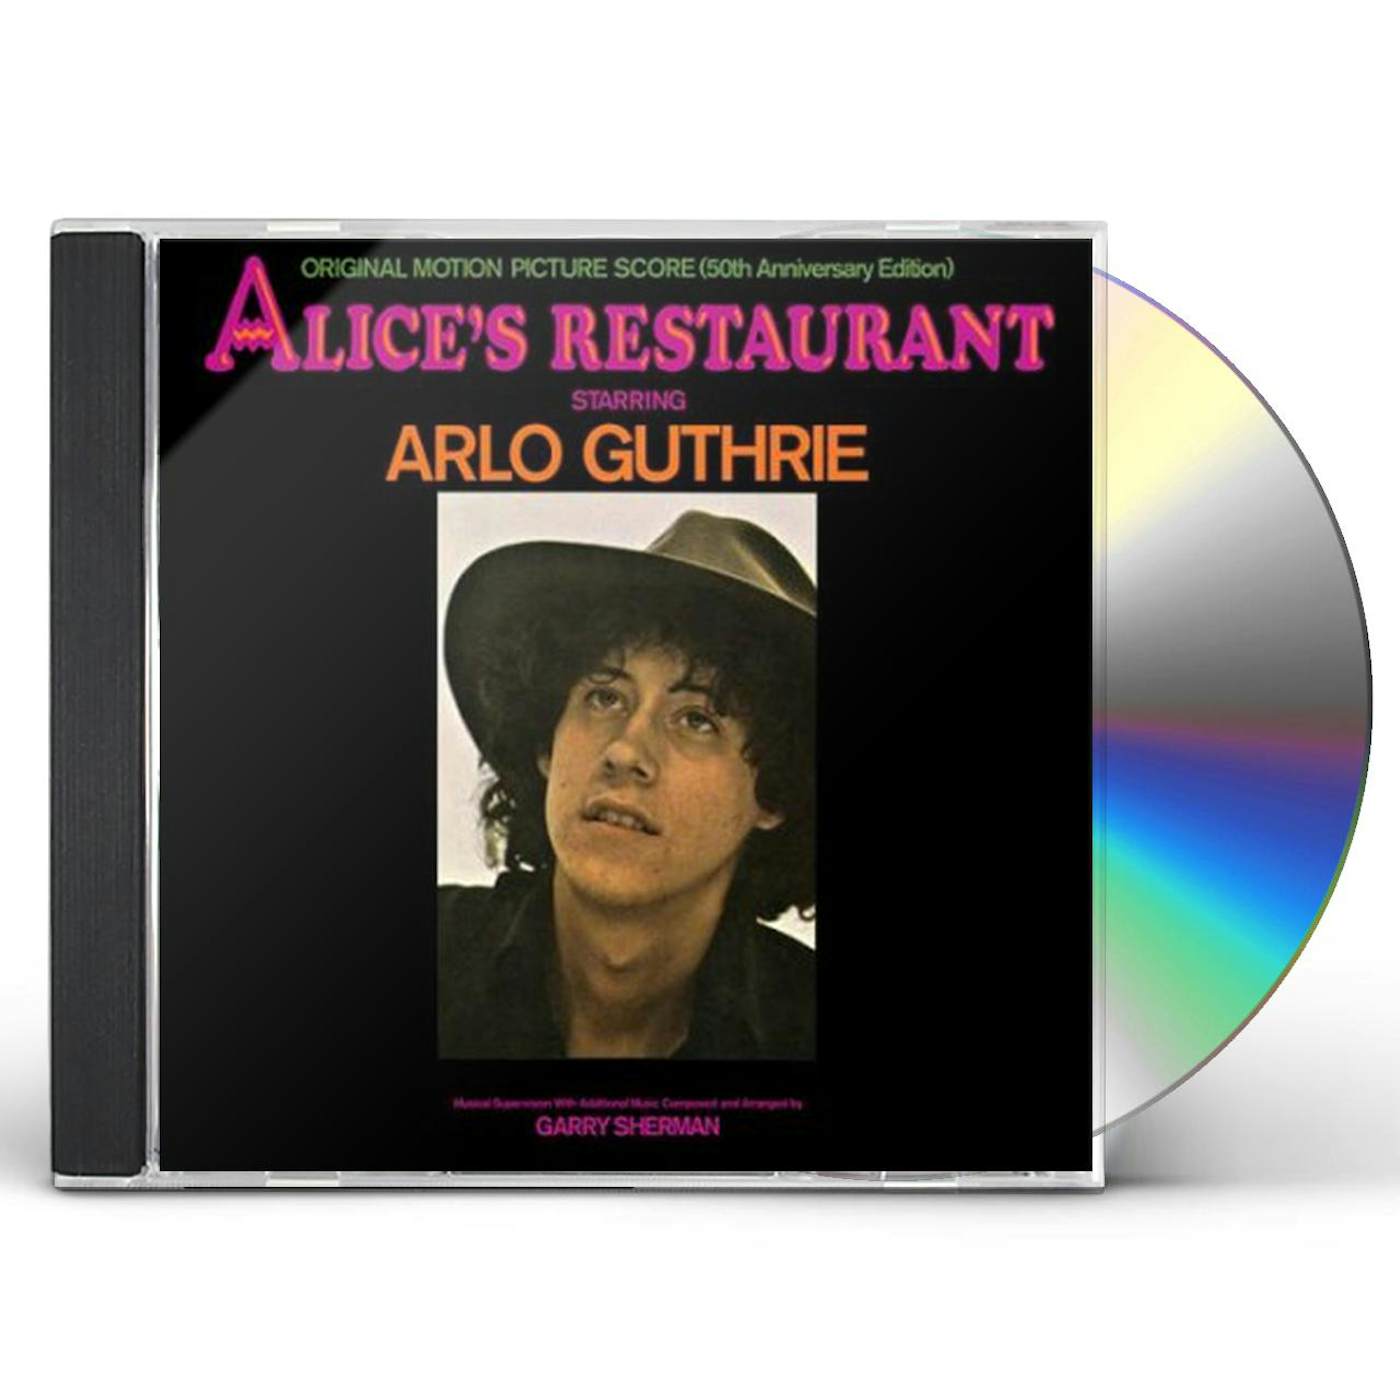 Arlo Guthrie ALICE'S RESTAURANT: ORIGINAL MGM MOTION PICTURE CD